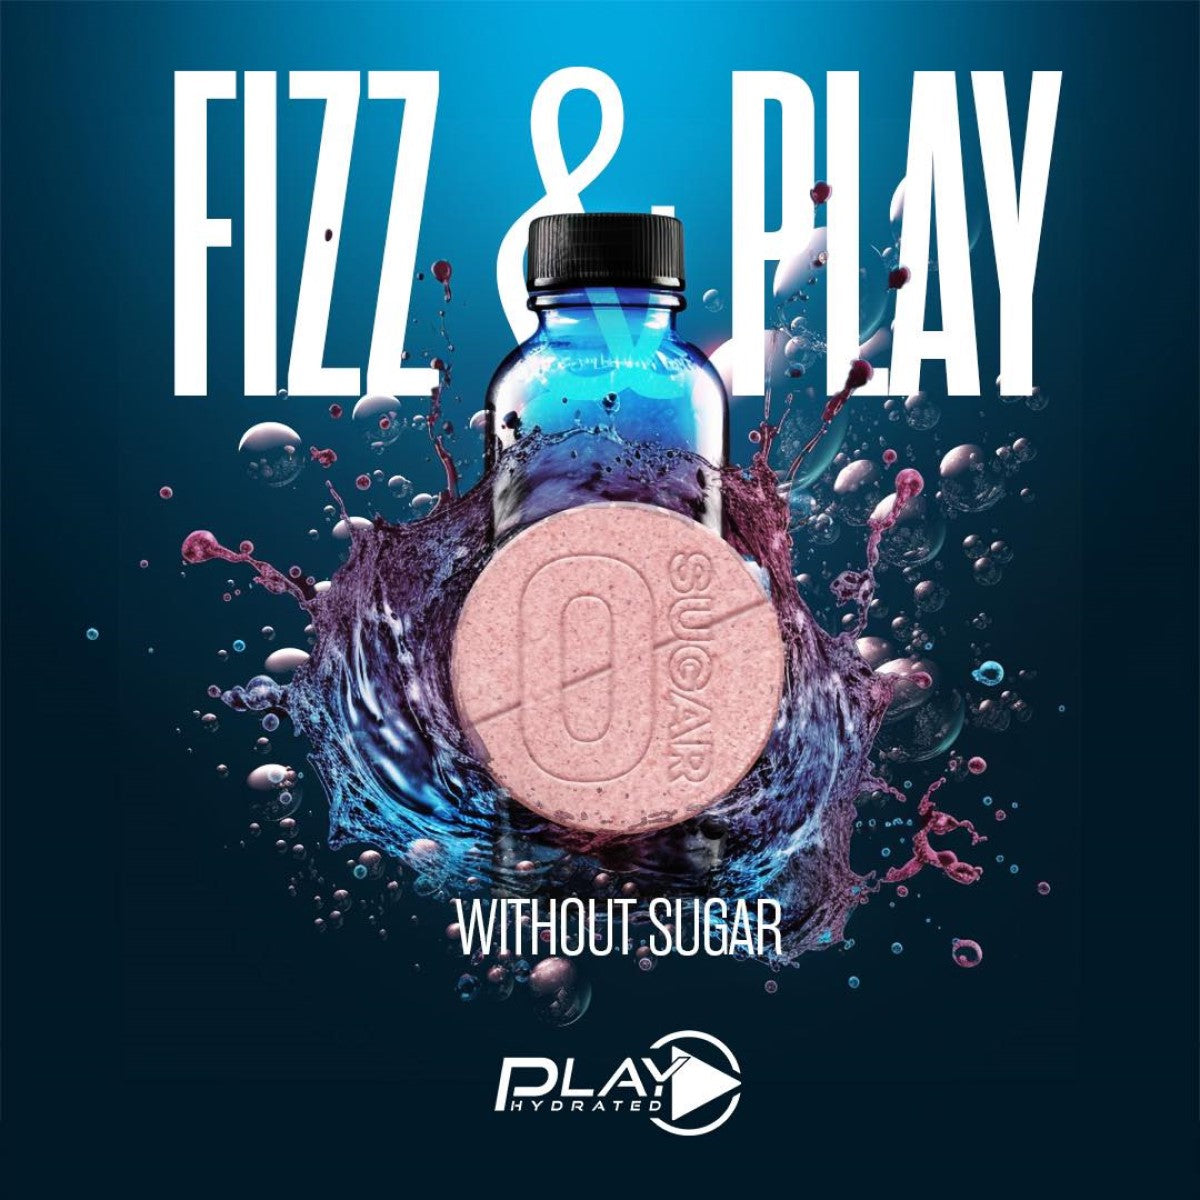 New Product: Hydration Tablets by Play Hydrated